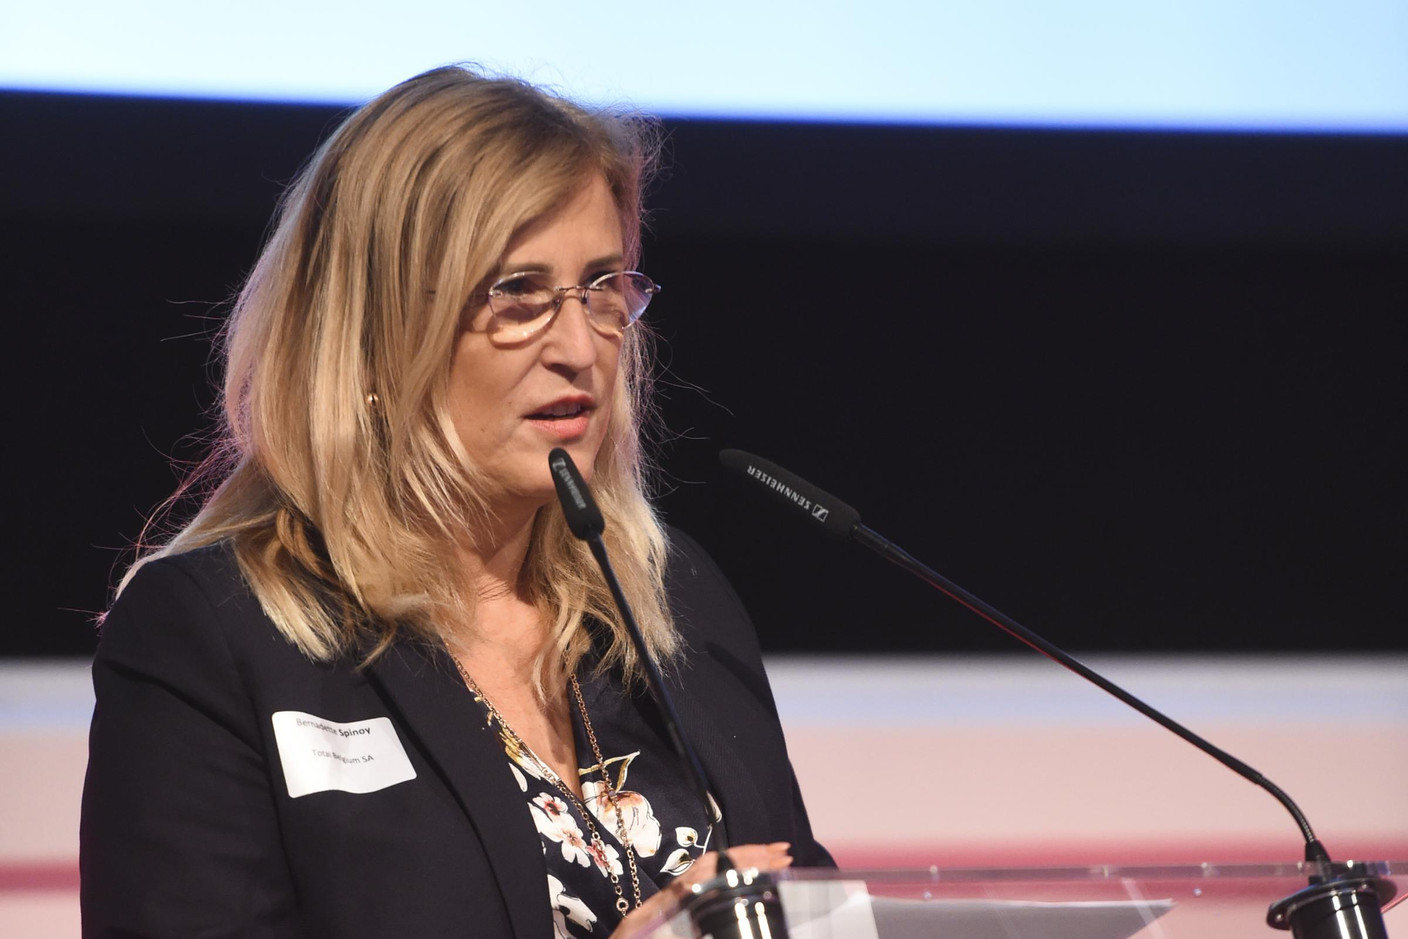 Bernadette Spinoy (Total Belgium) (Photo: Total Luxembourg)